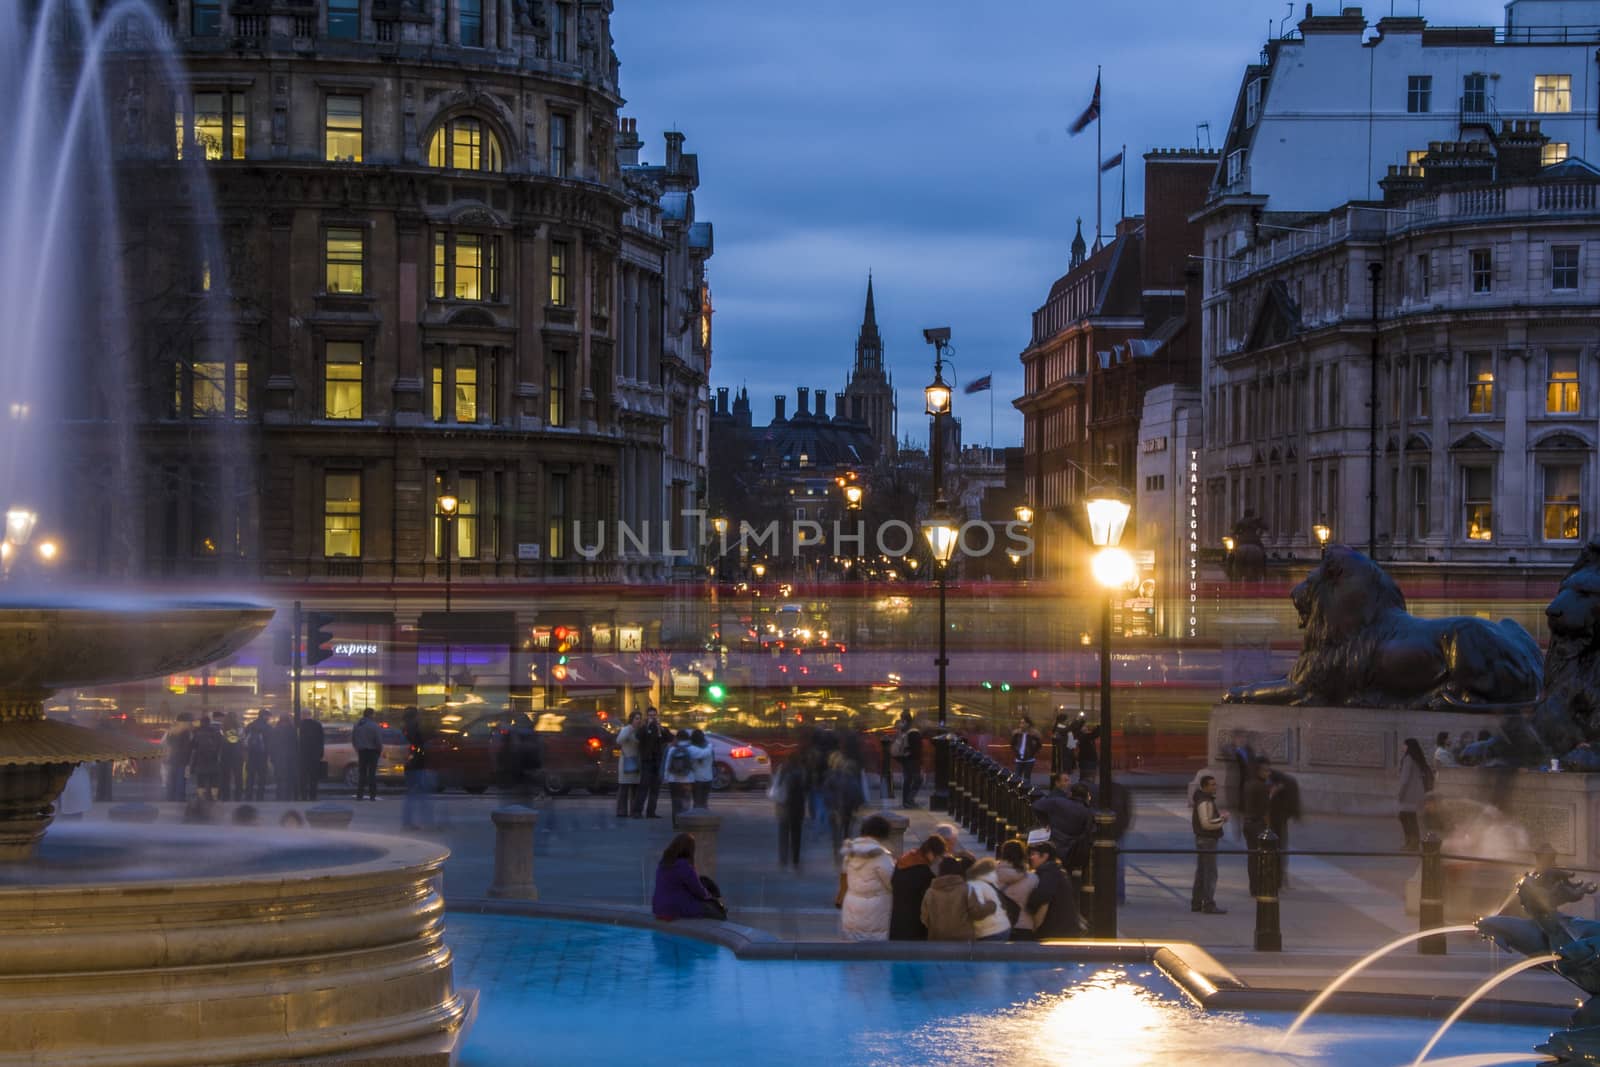 Trafalgar Square in the blue hour, London by tanaonte